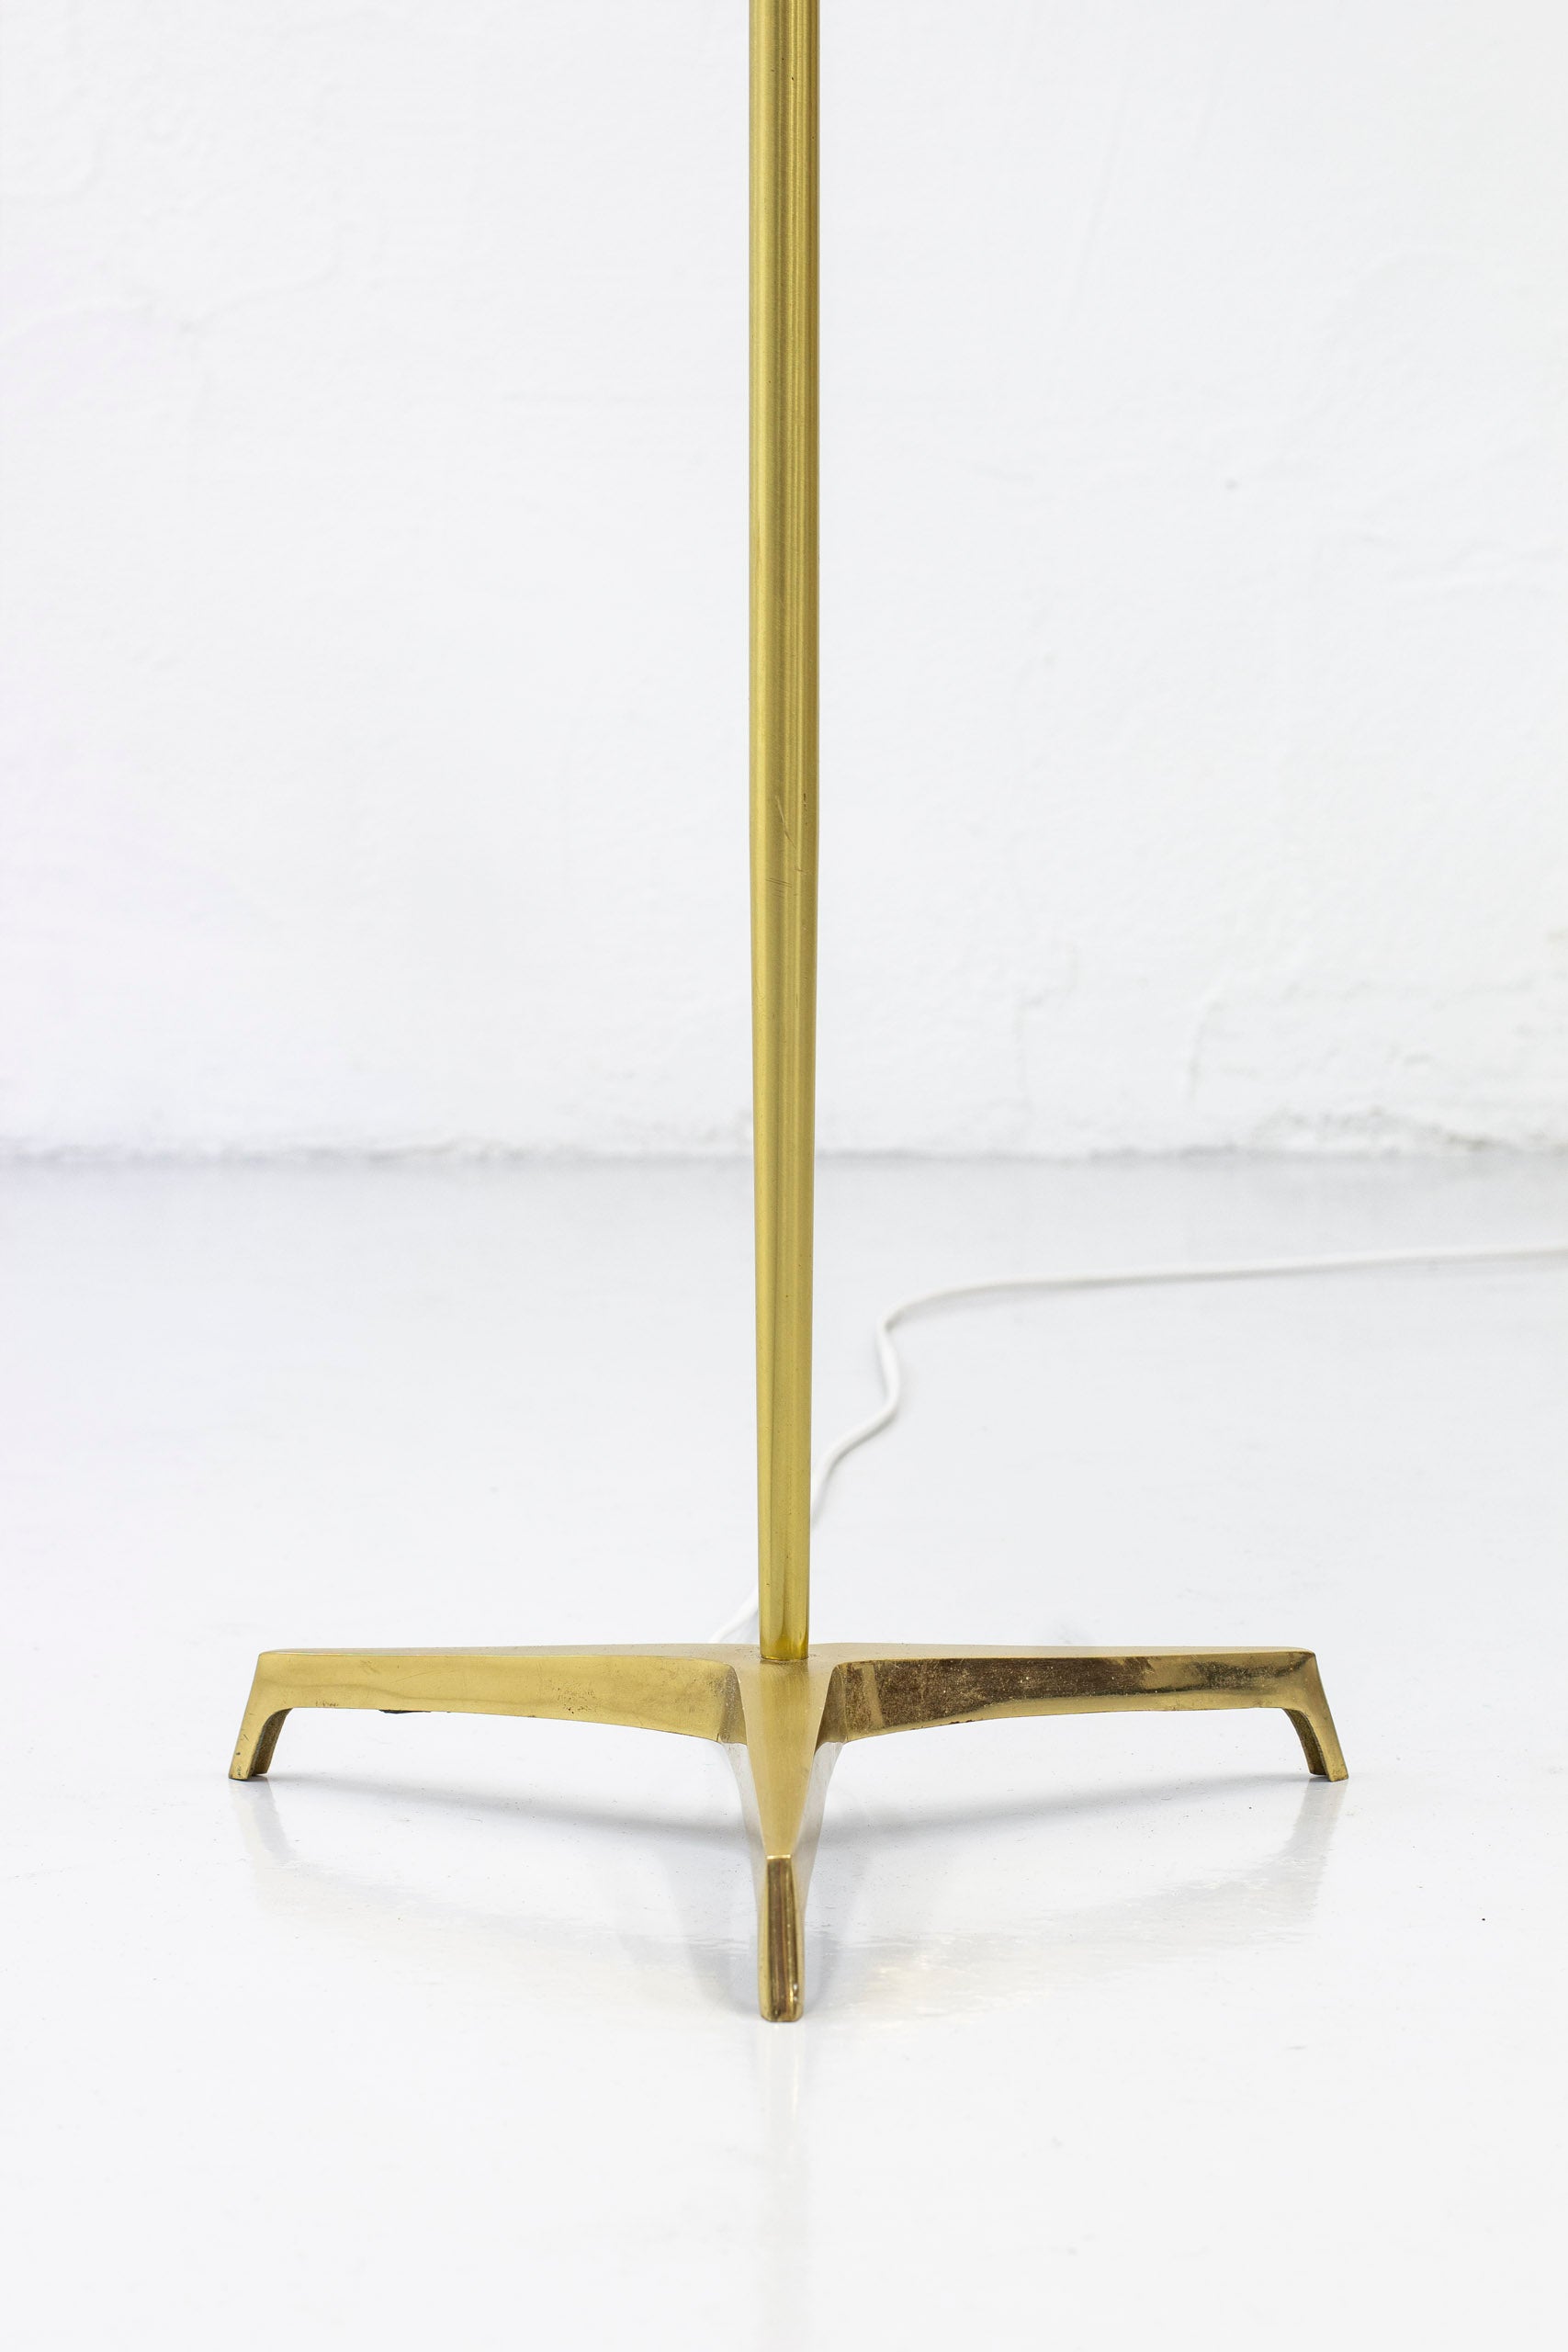 Swedish floor lamp from the 1950s